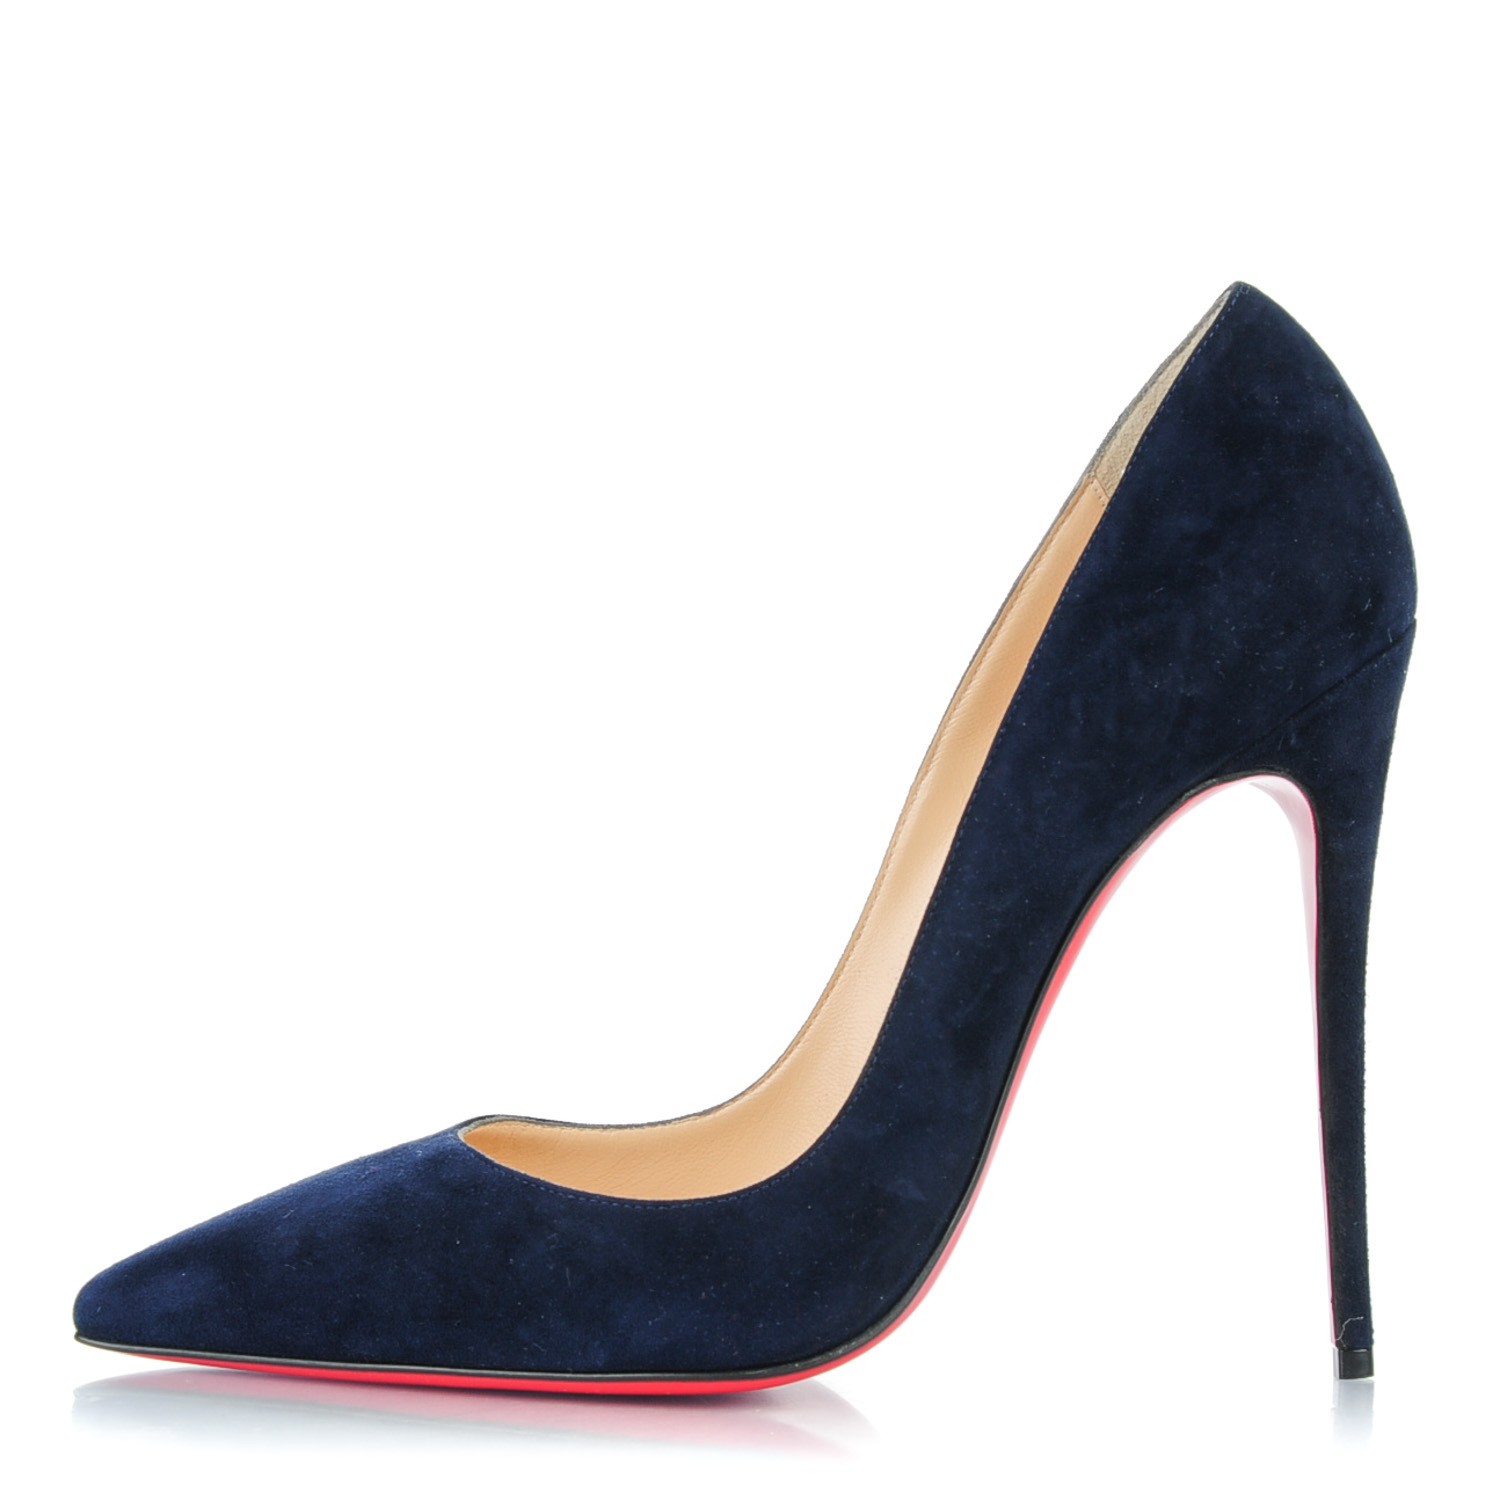 CHRISTIAN LOUBOUTIN Suede So Kate 120 Pumps 39 Nuit 156926 ...